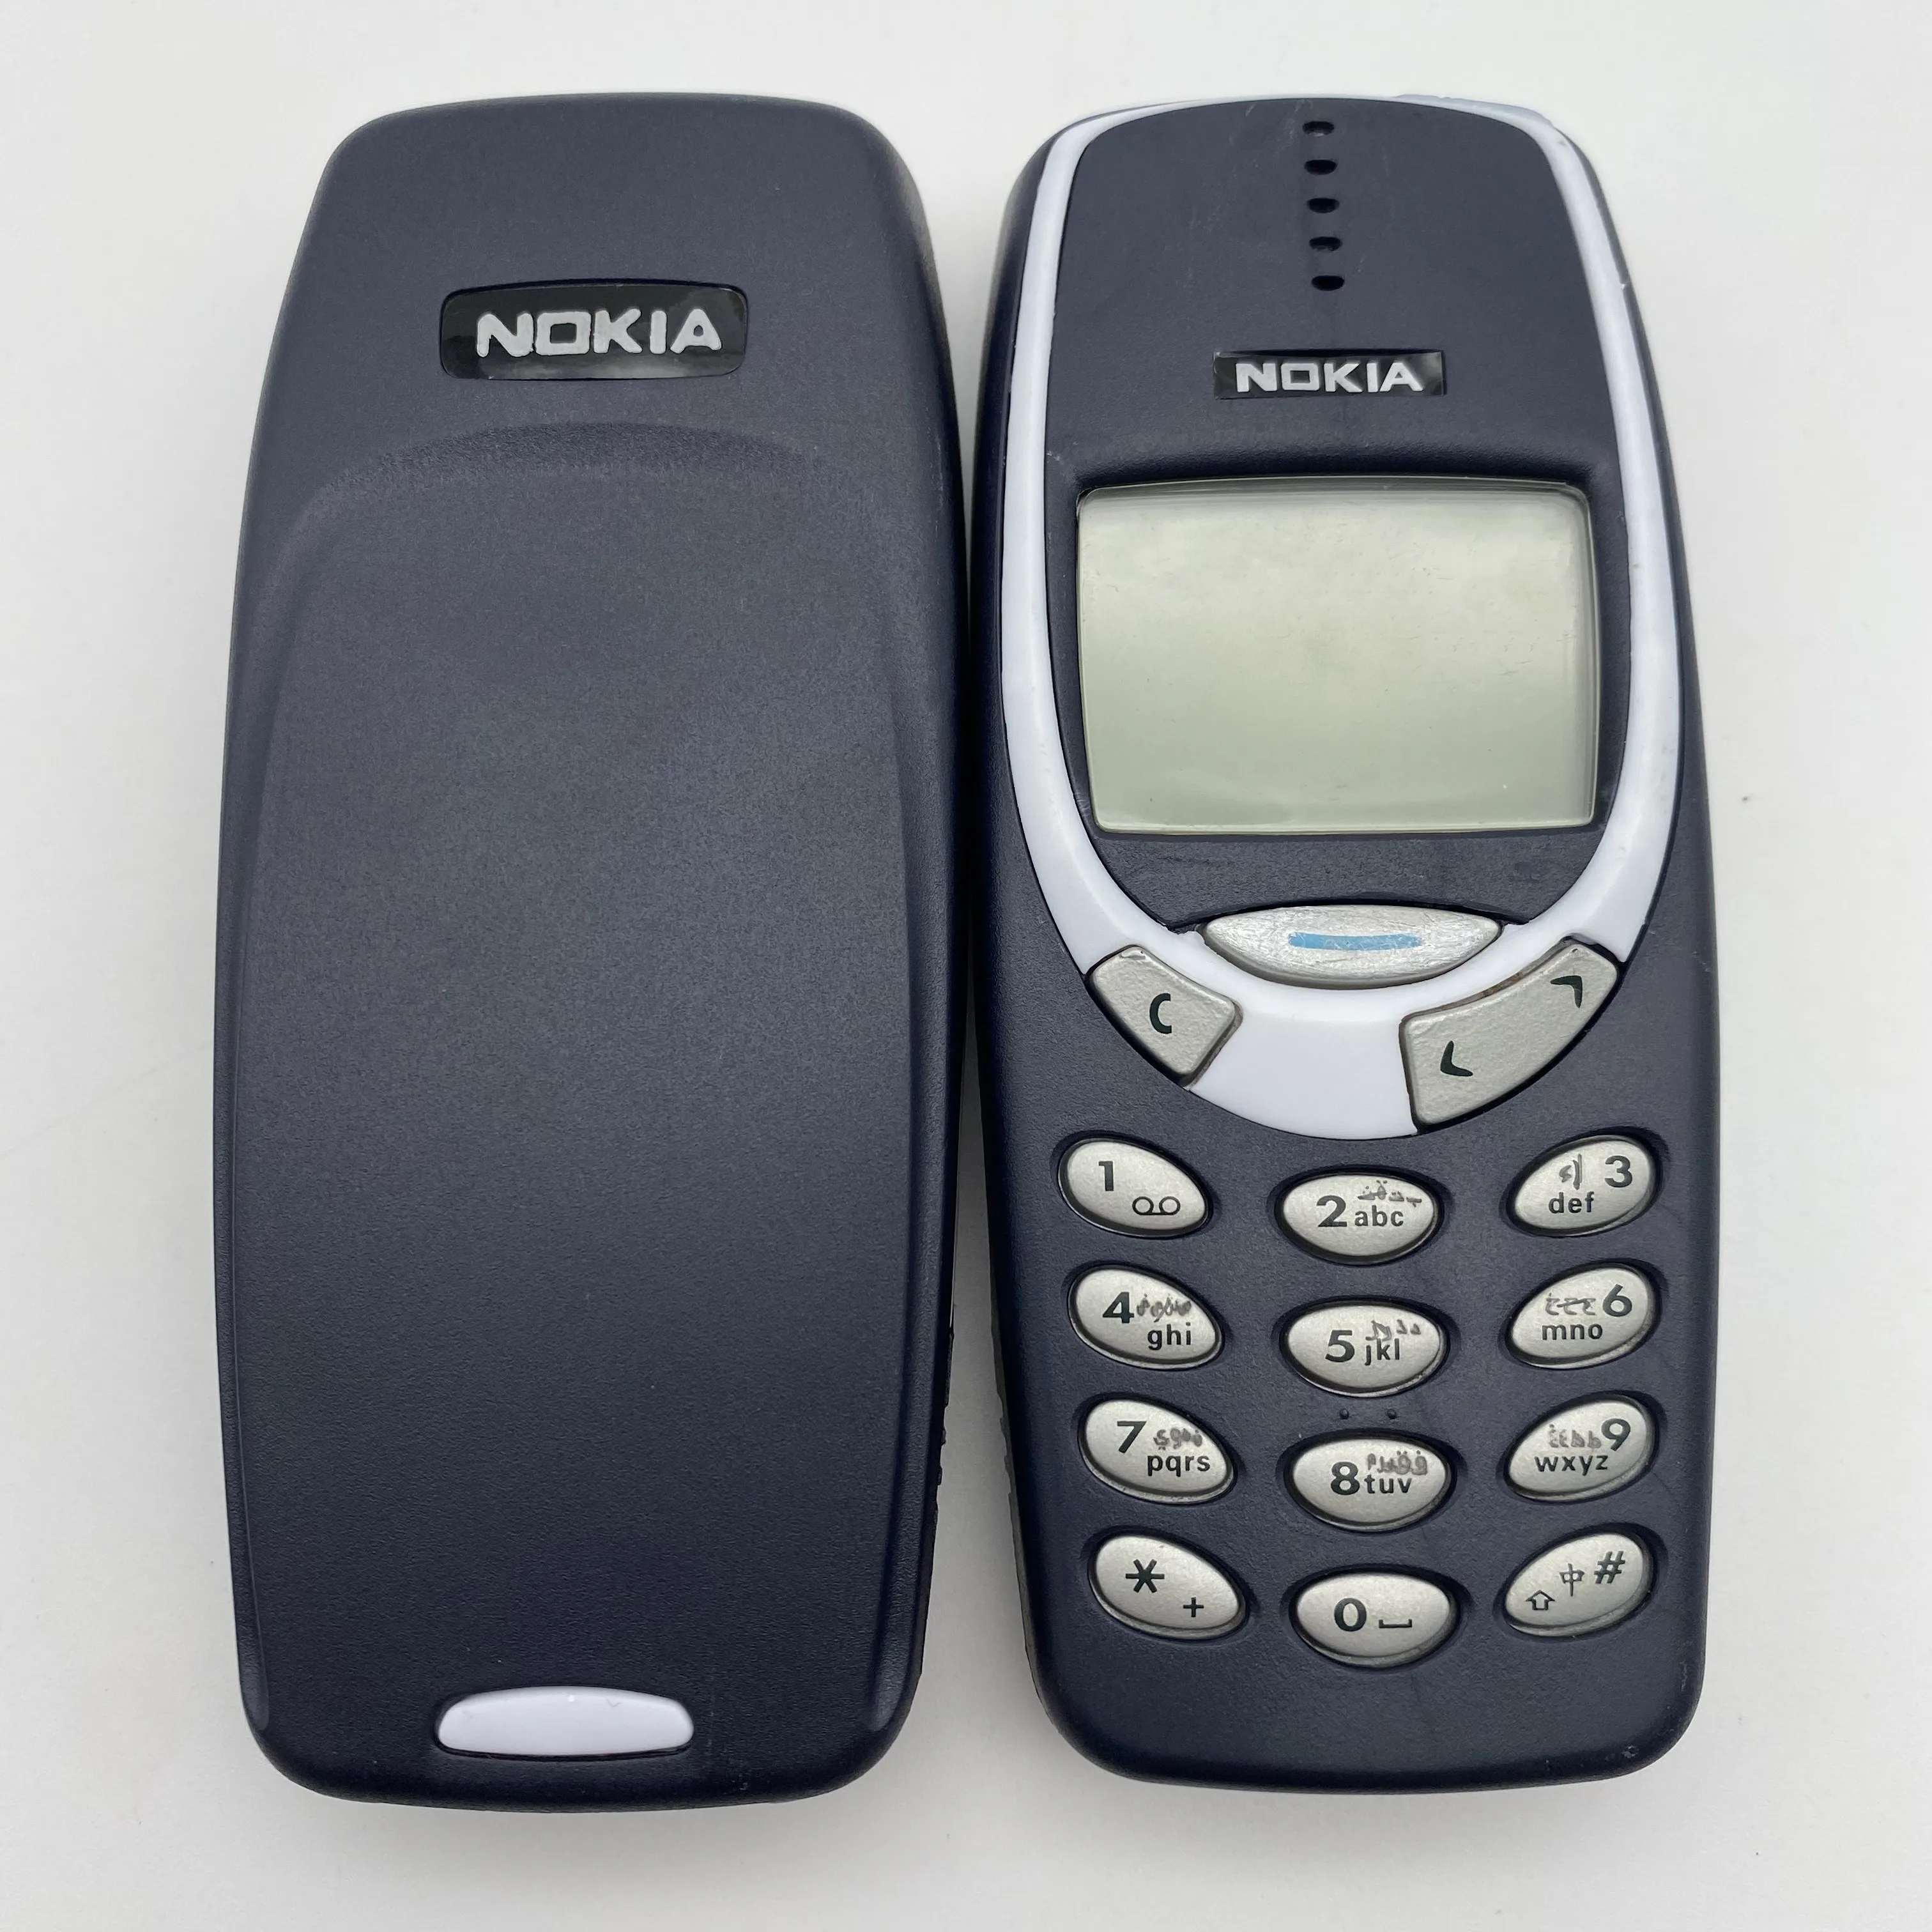 nokia 3310 2000 refurbished original 3310 phone unlocked gsm 9001800 with 1 year warranty cheap free shipping free global shipping